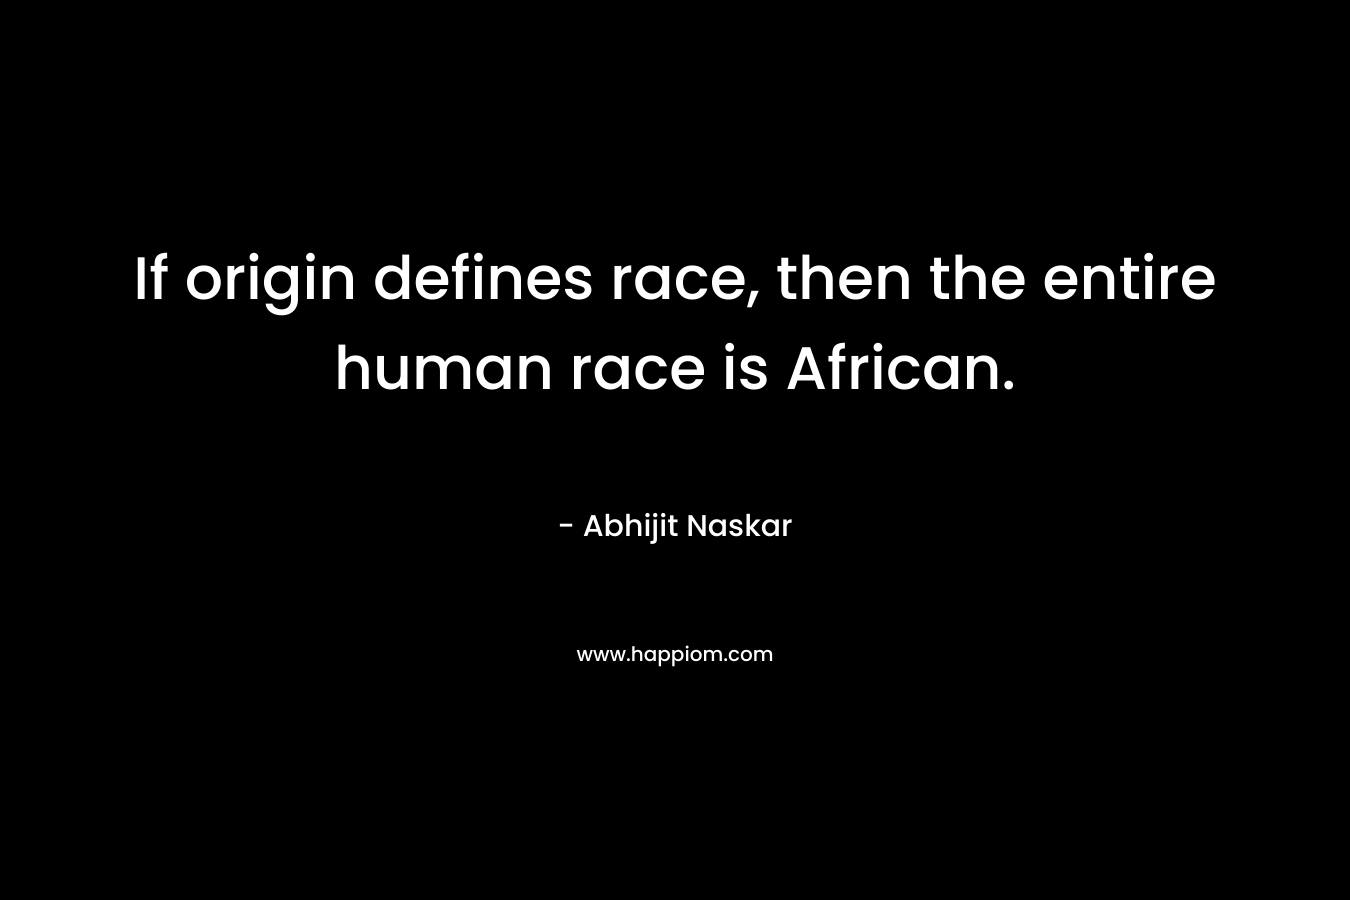 If origin defines race, then the entire human race is African.